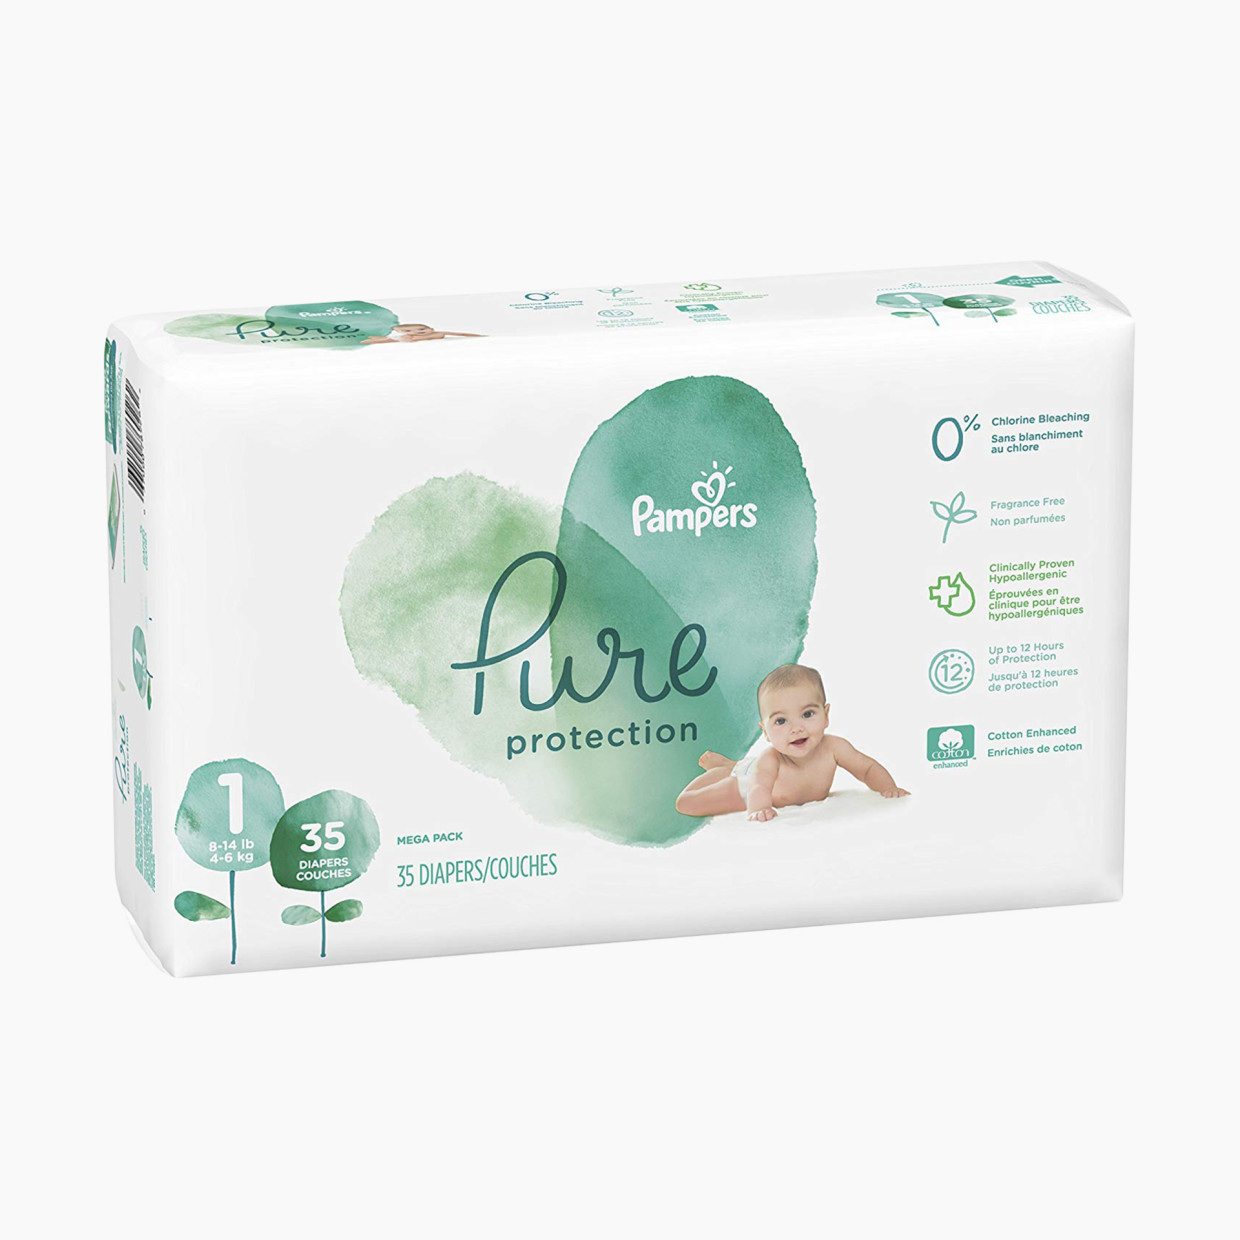 Pampers Pure Disposable Diapers - 1 Week Supply, 1.